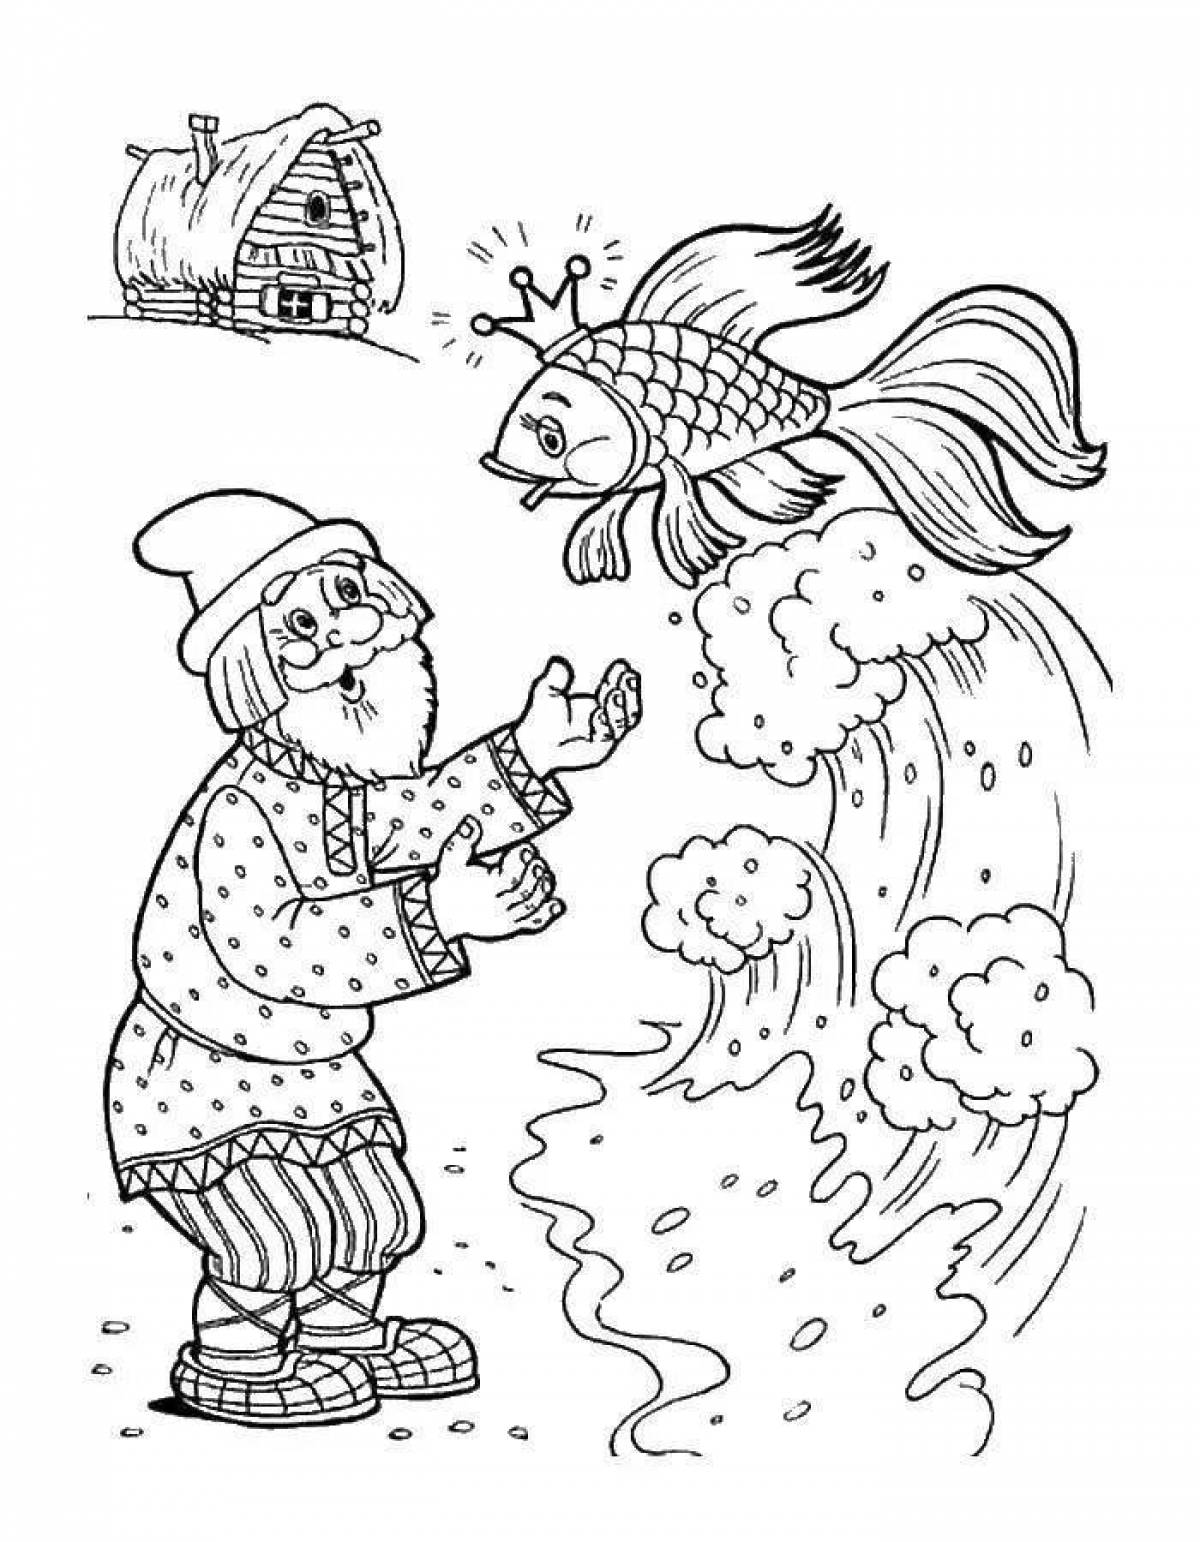 Great coloring book based on Pushkin's fairy tales for preschoolers